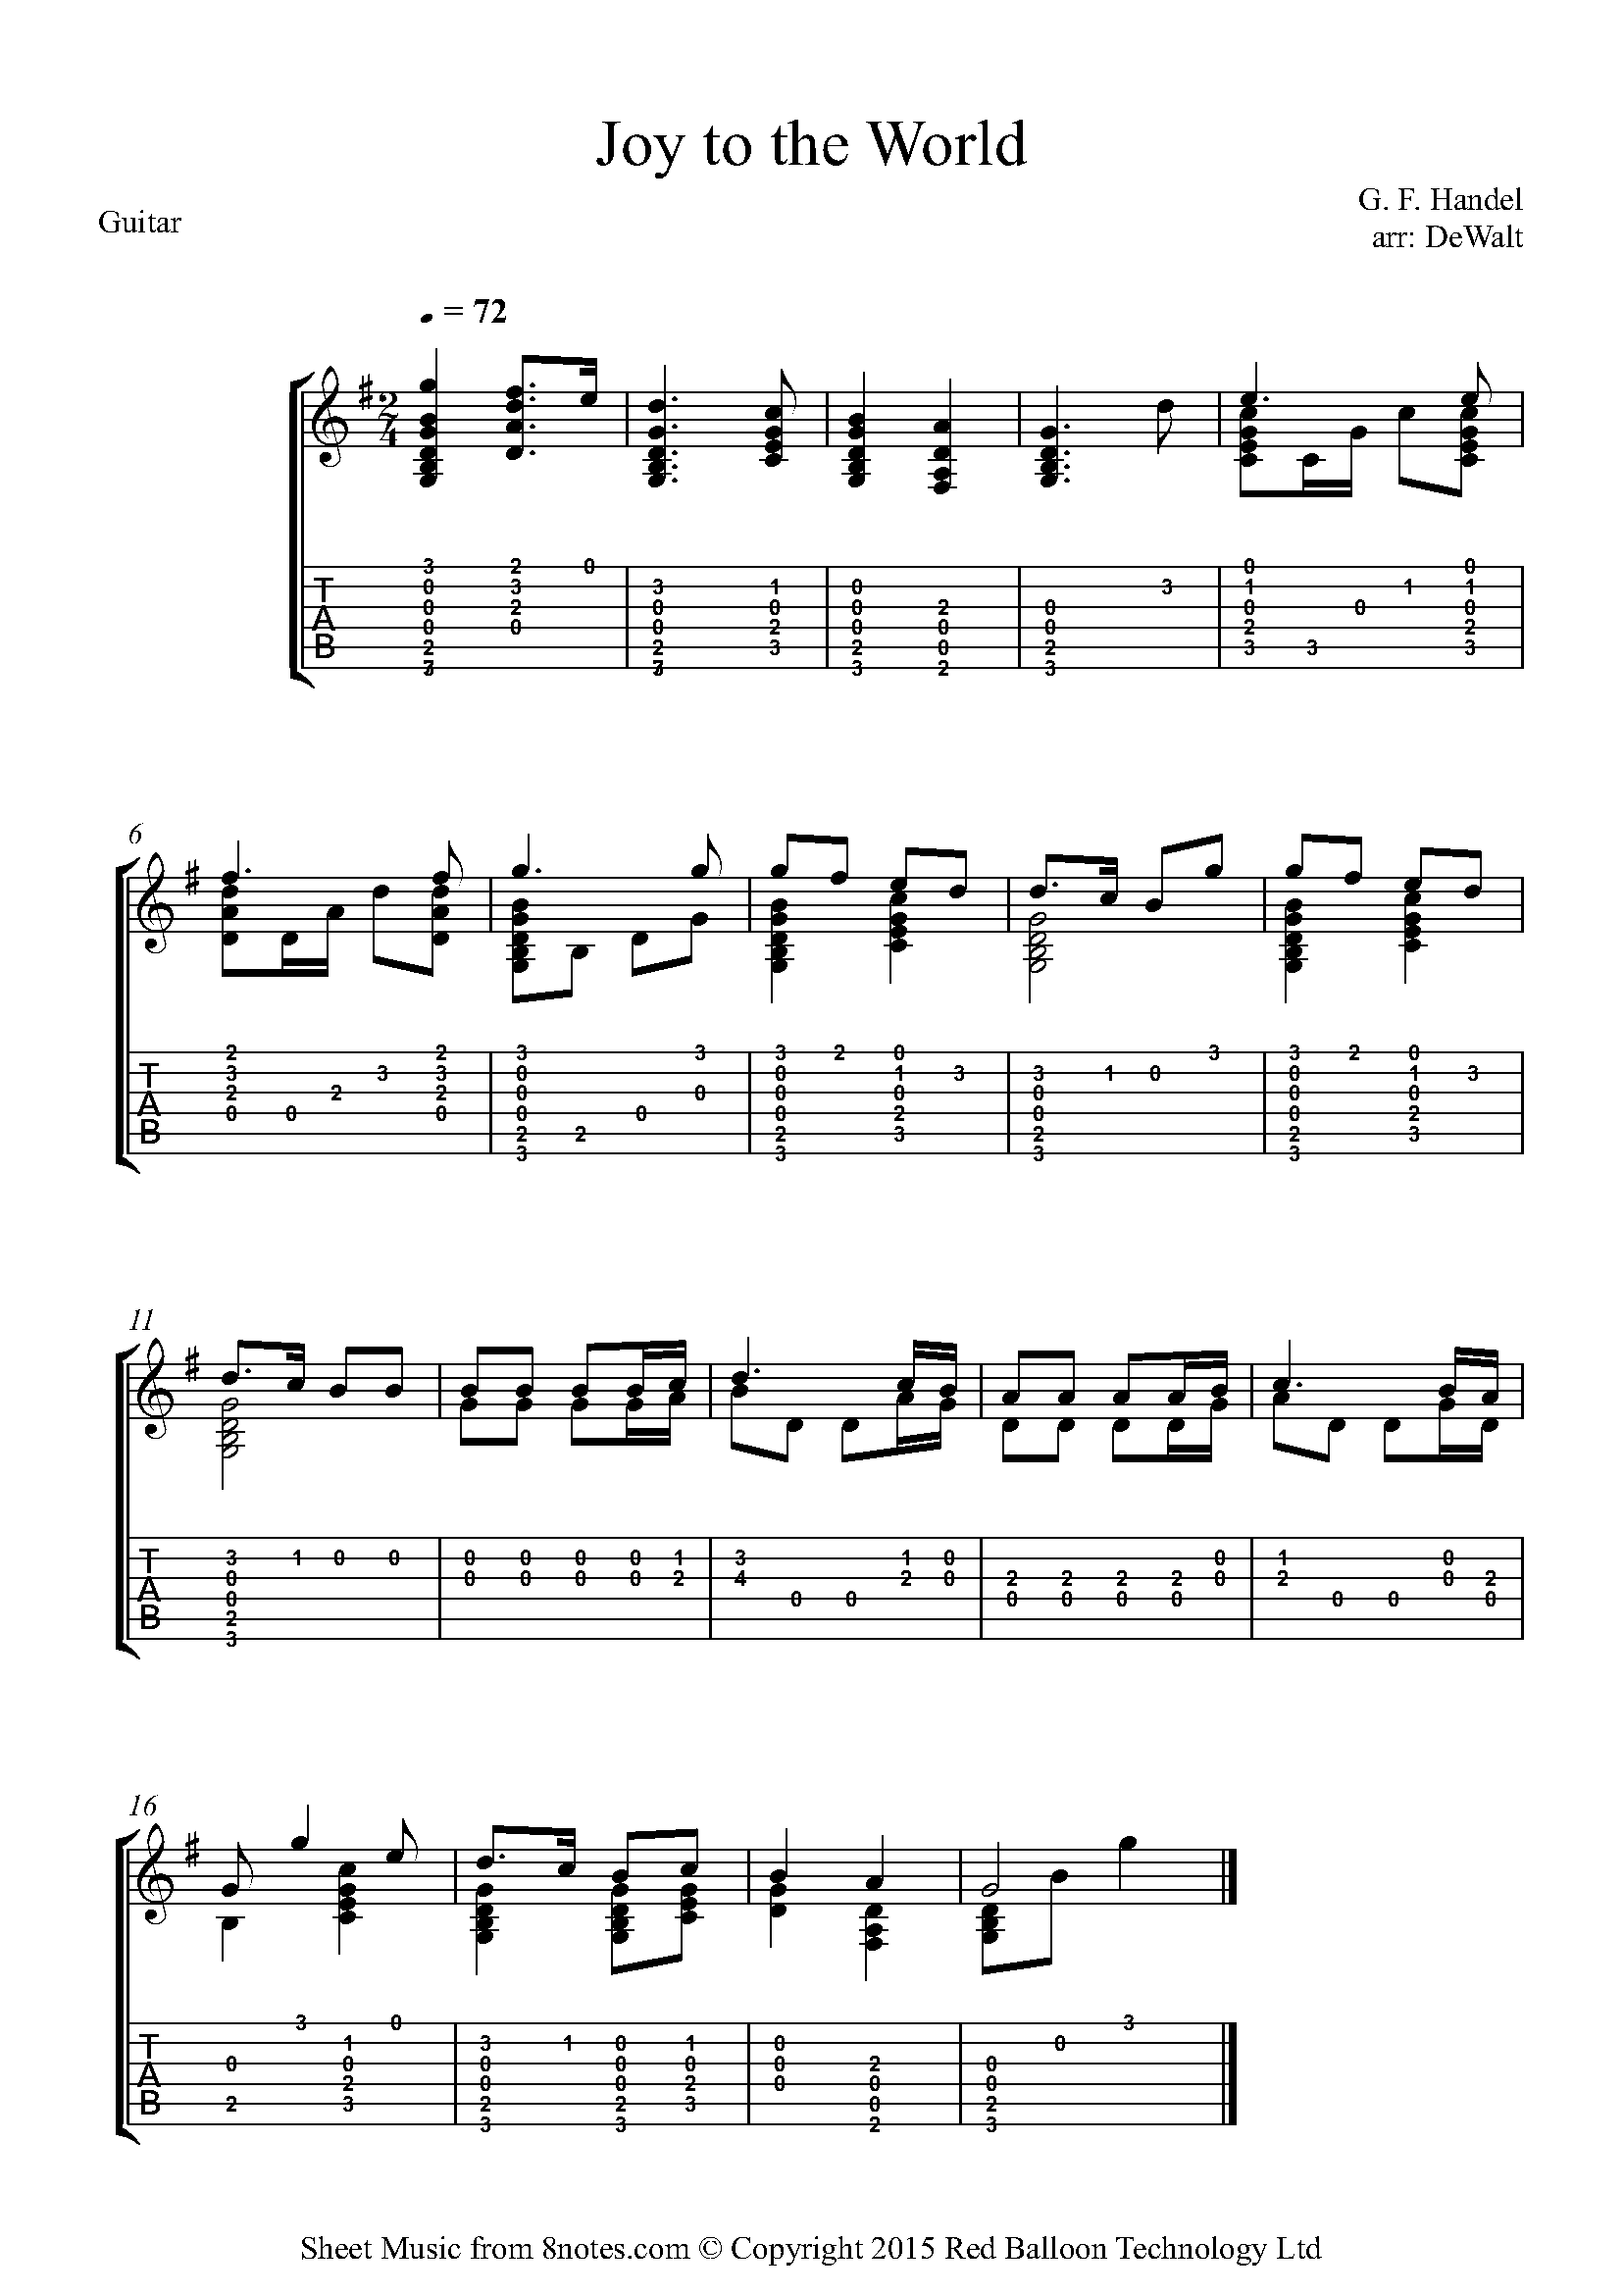 Joy to the World guitar sheet music from 8notes.com